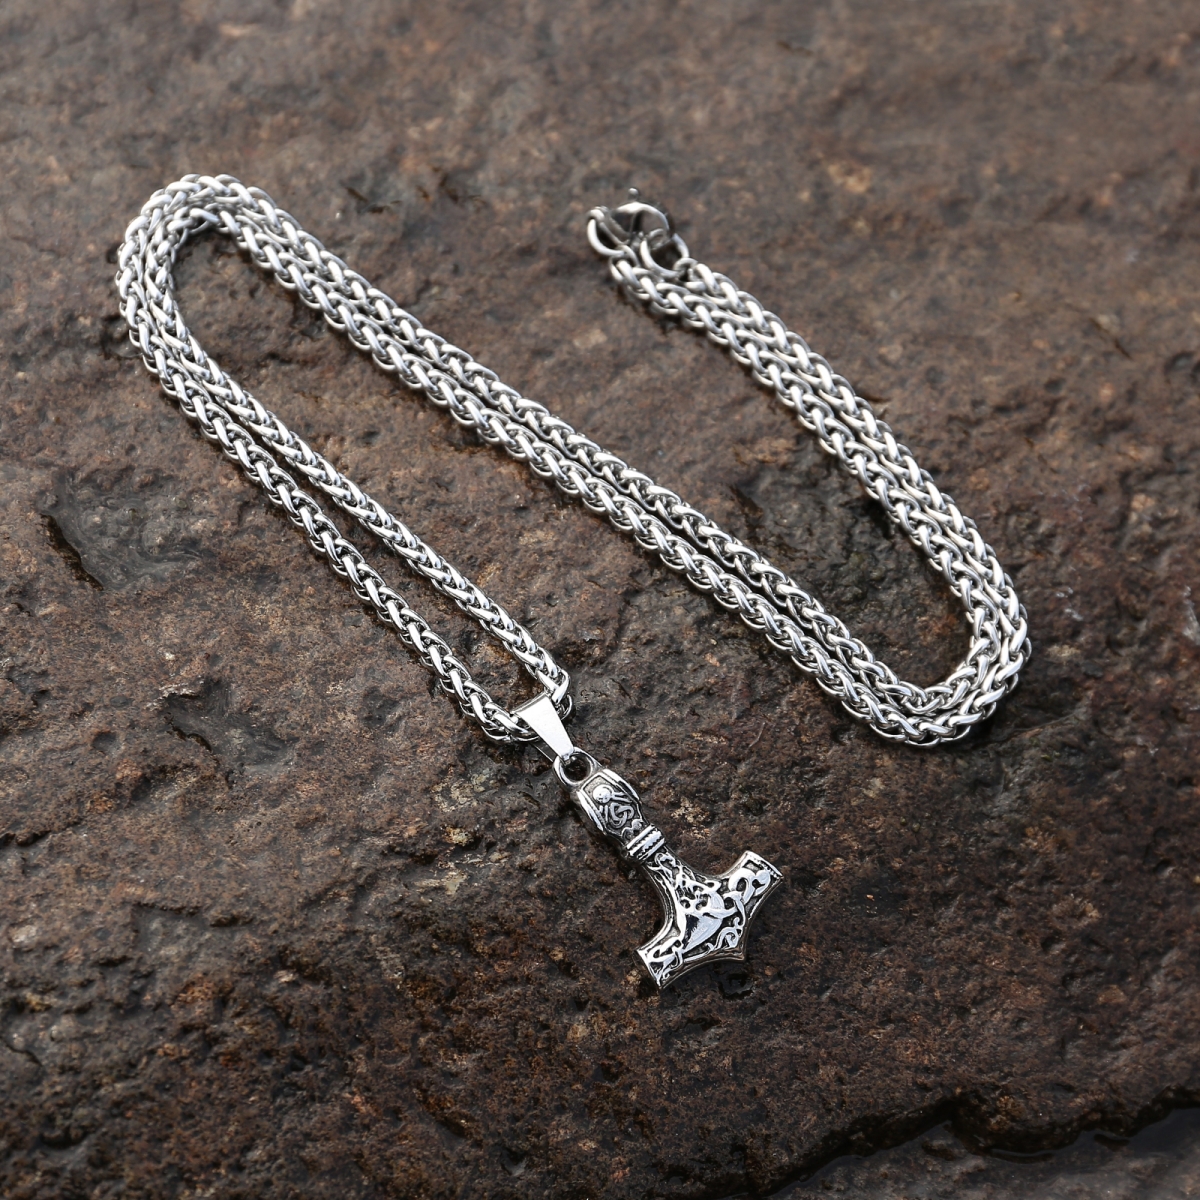 Mjolnir Amulet Necklace US$2.9/PC-NORSECOLLECTION- Viking Jewelry,Viking Necklace,Viking Bracelet,Viking Rings,Viking Mugs,Viking Accessories,Viking Crafts